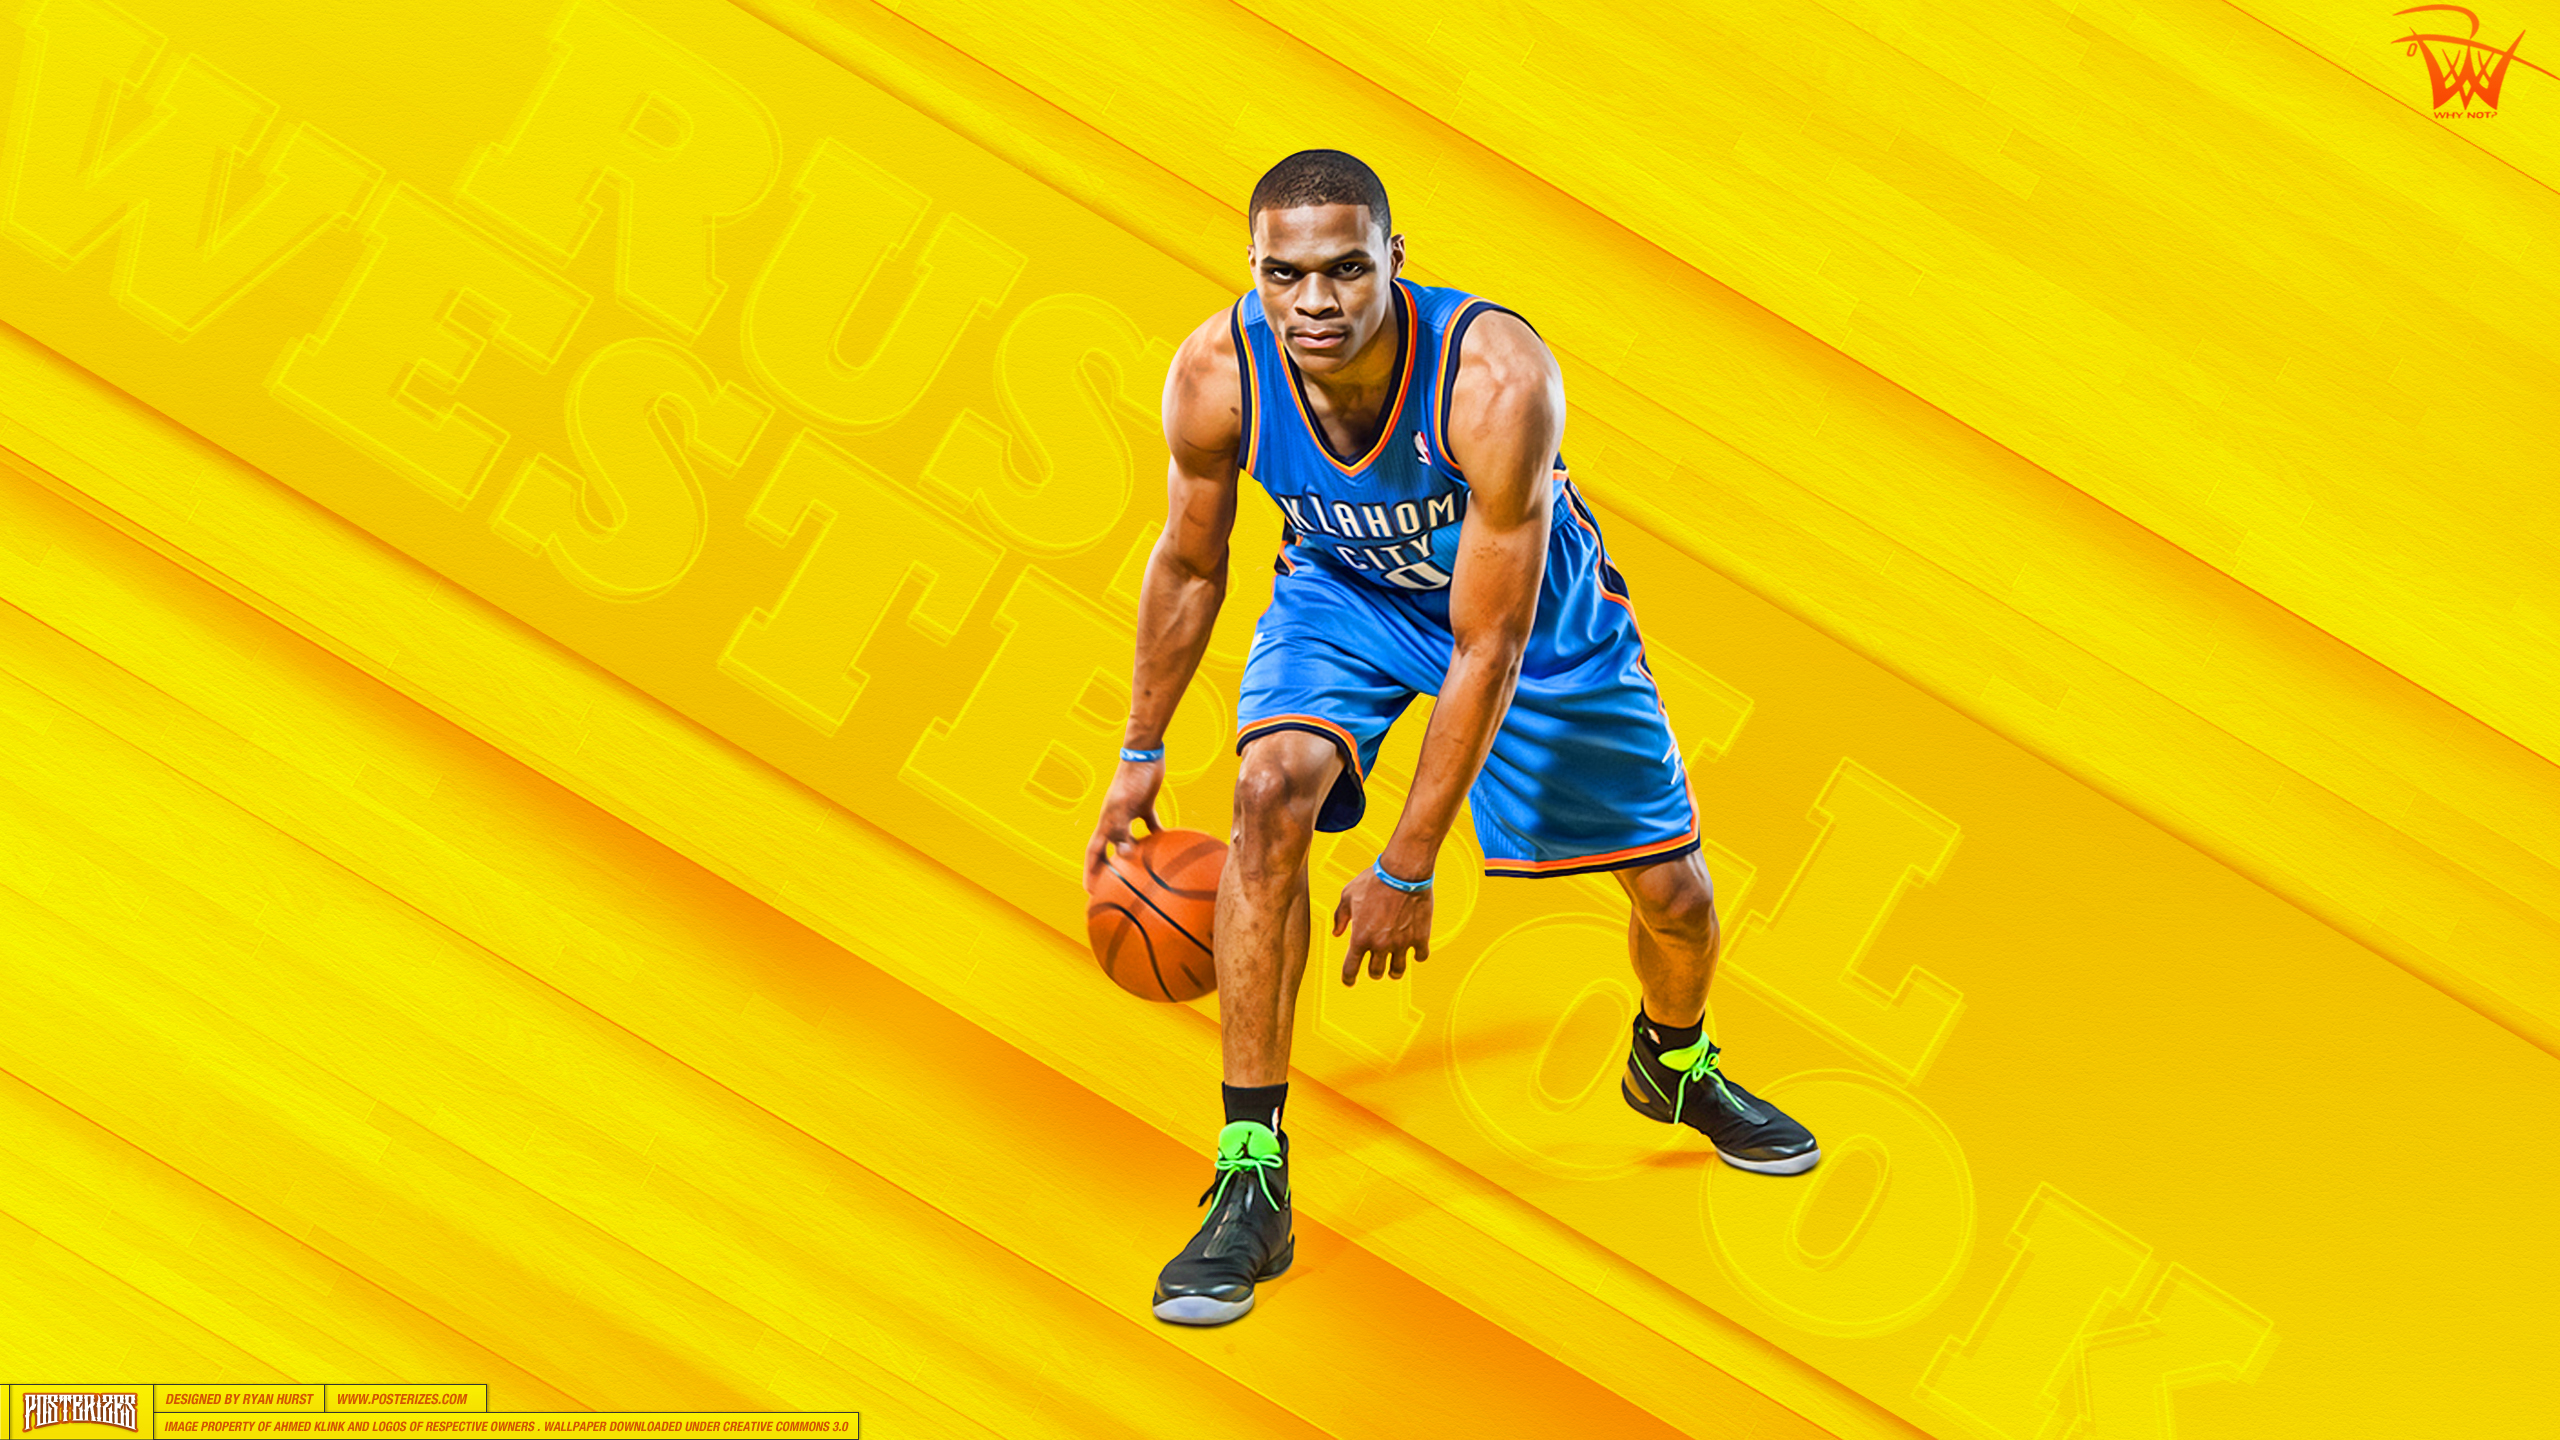 Russell Westbrook Why Not Wallpaper Posterizes Nba